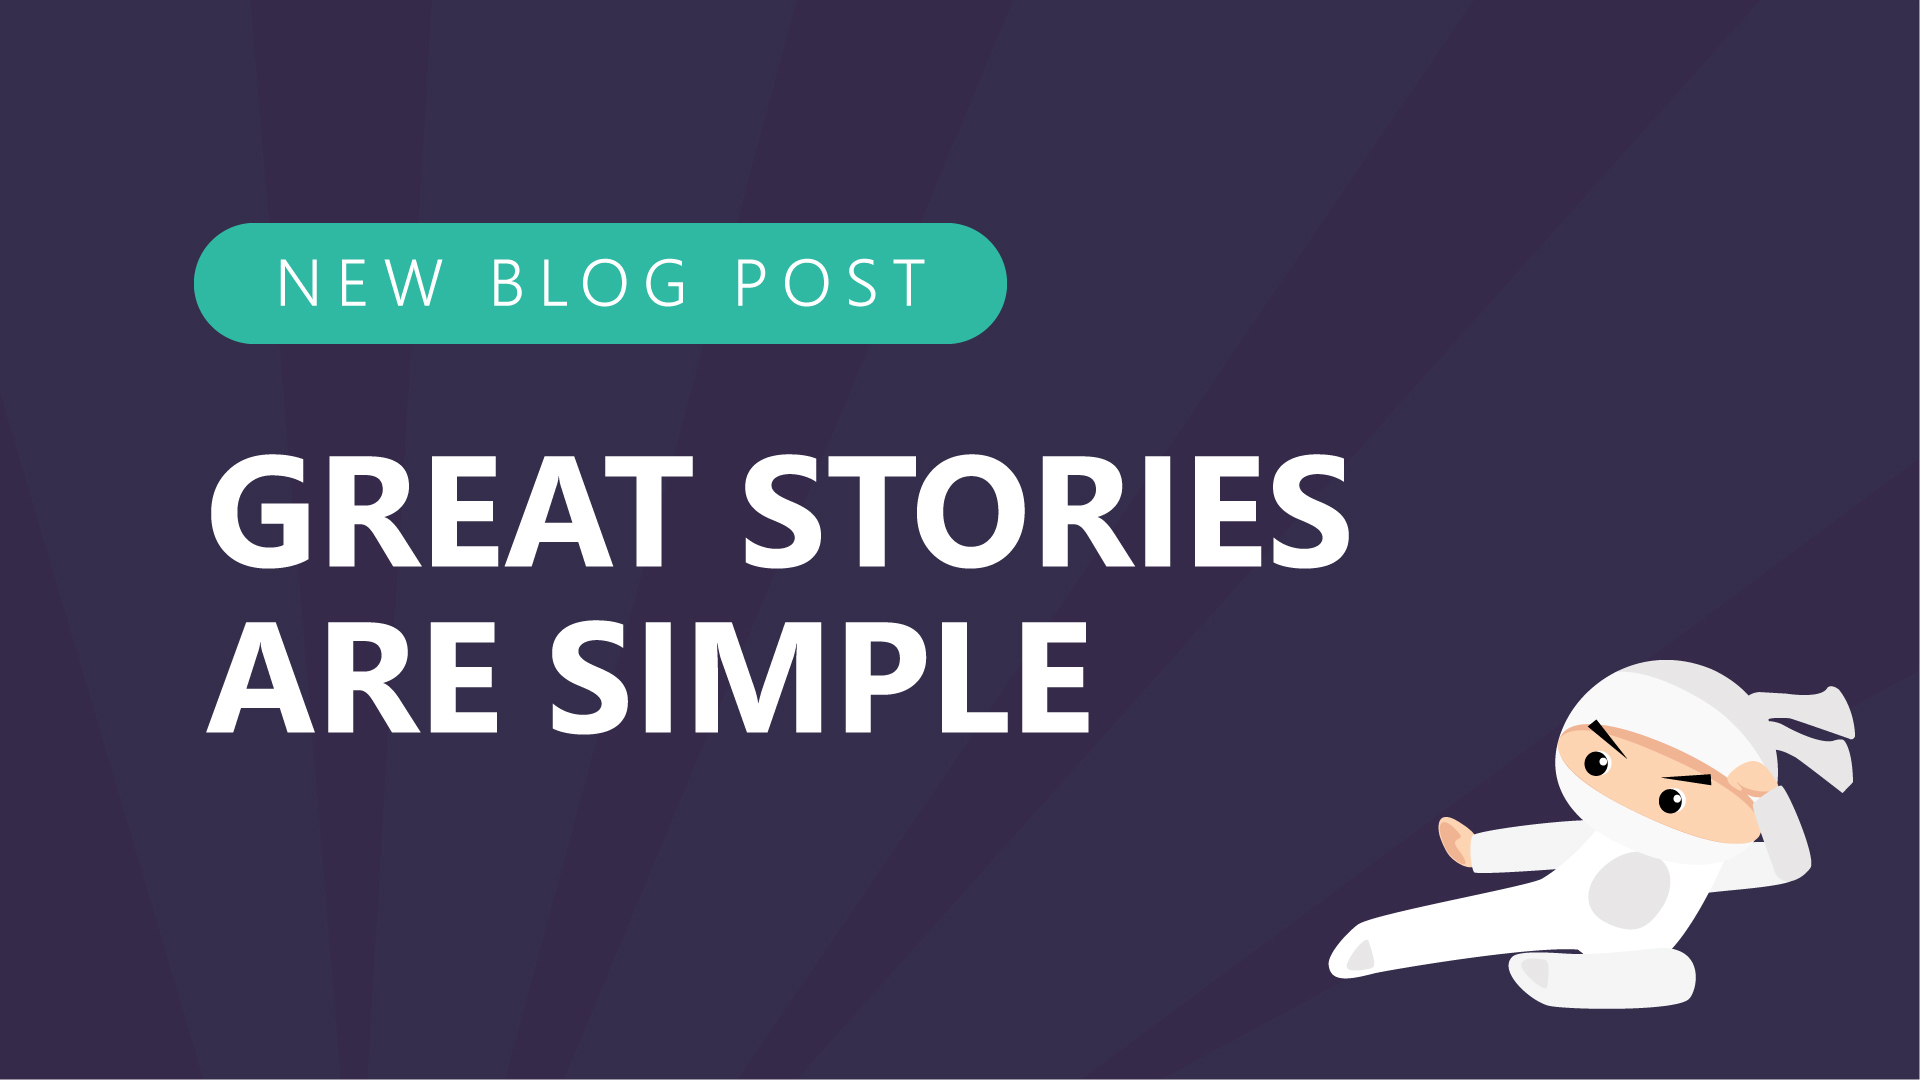 Great stories are simple